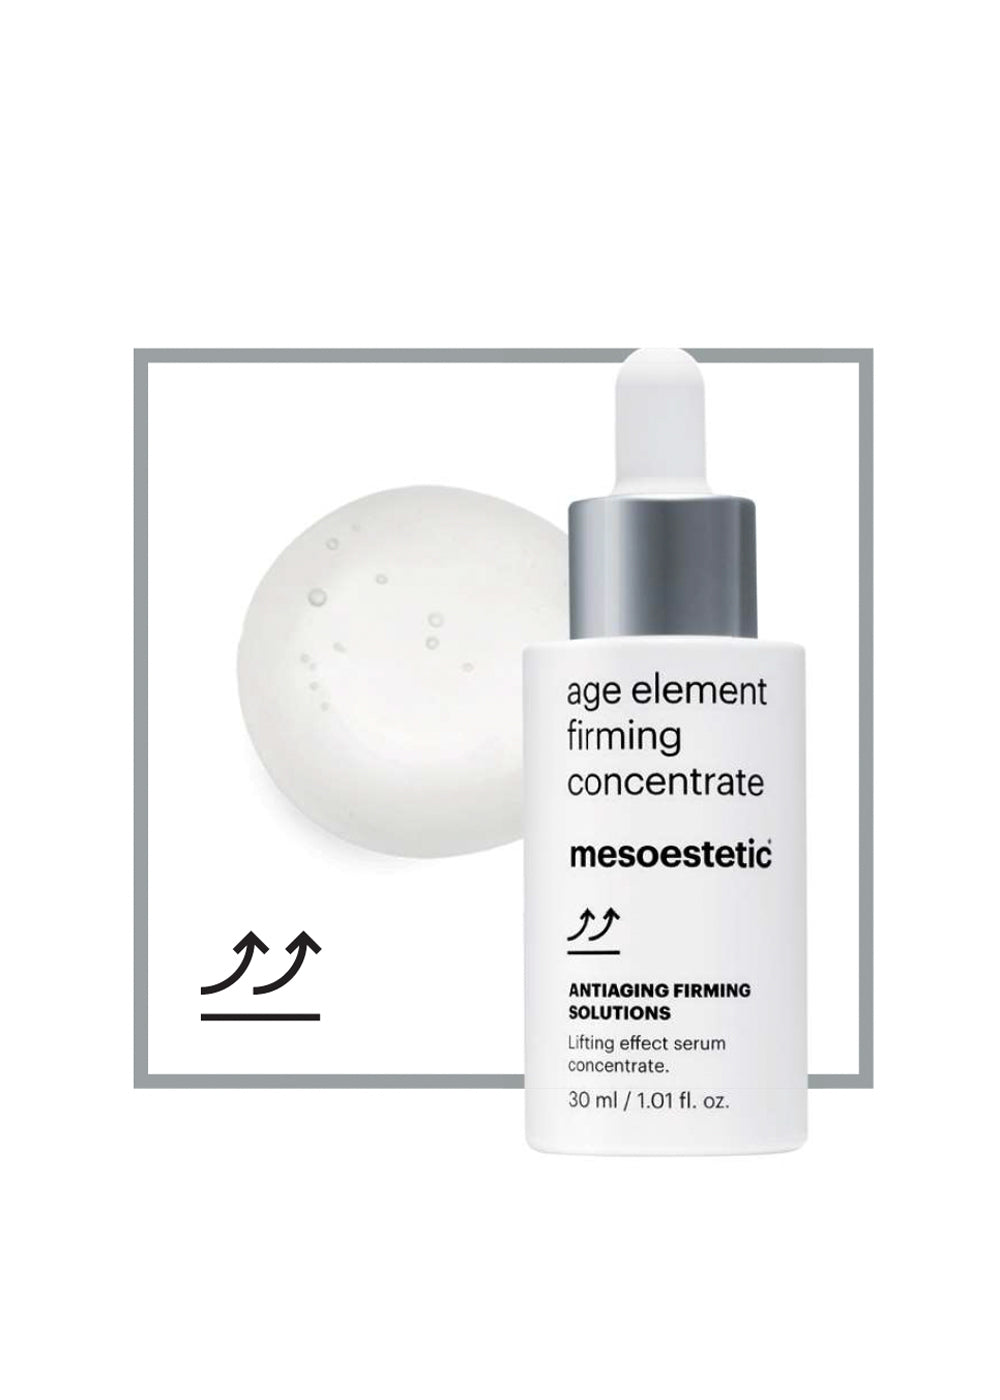 Mesoestetic age element® firming concentrate